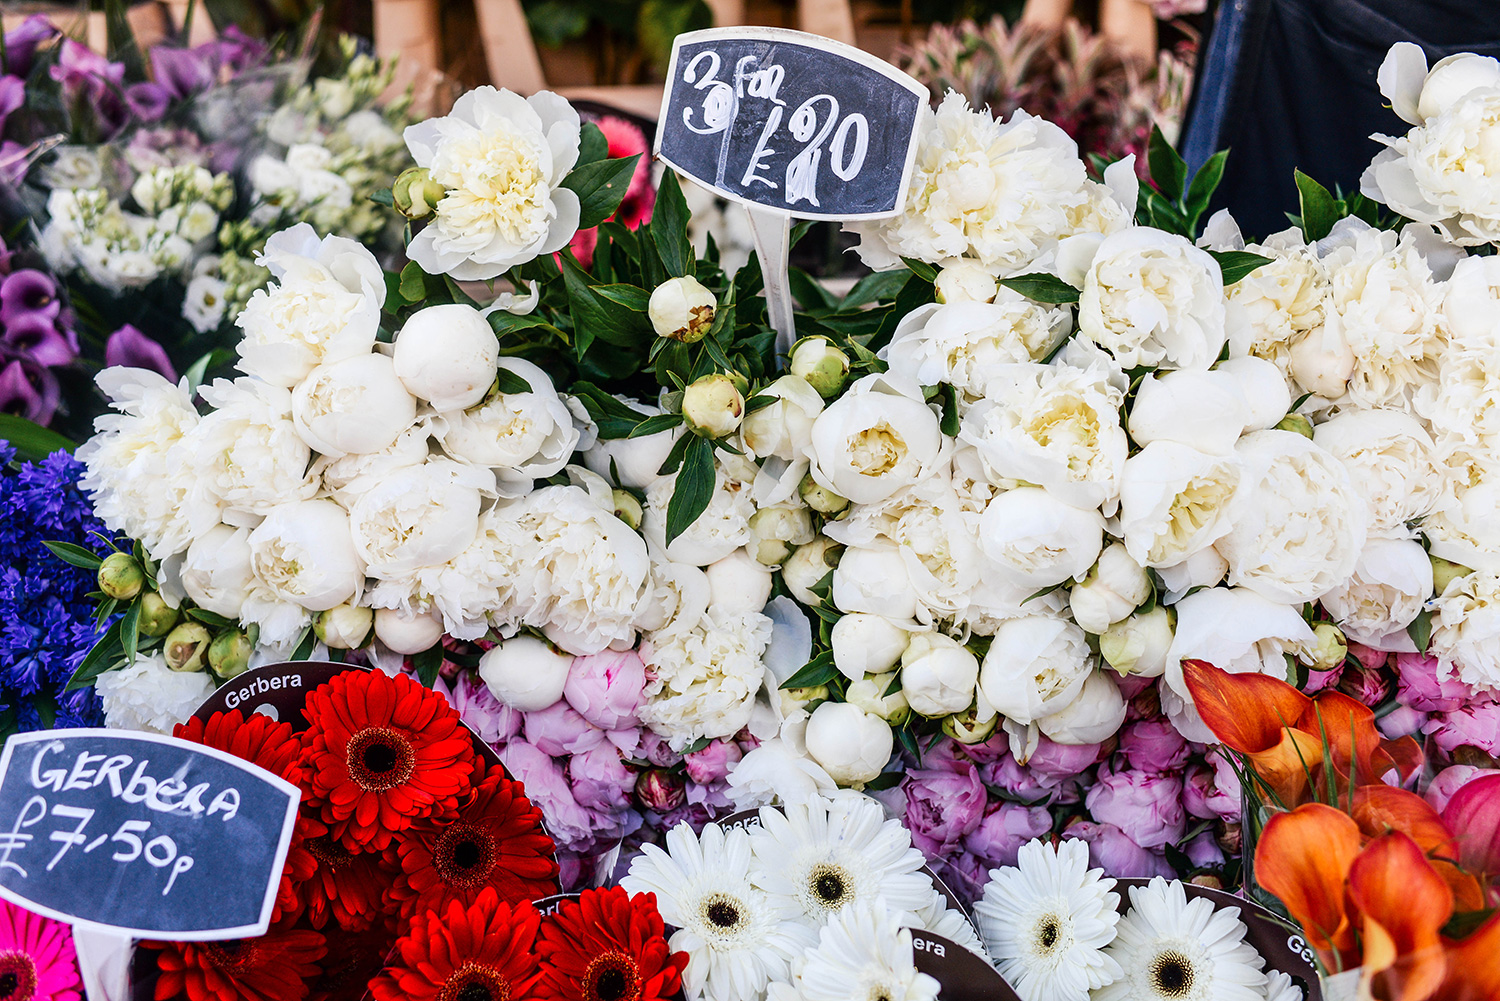 Columbia Road Flower Market | The Style Scribe